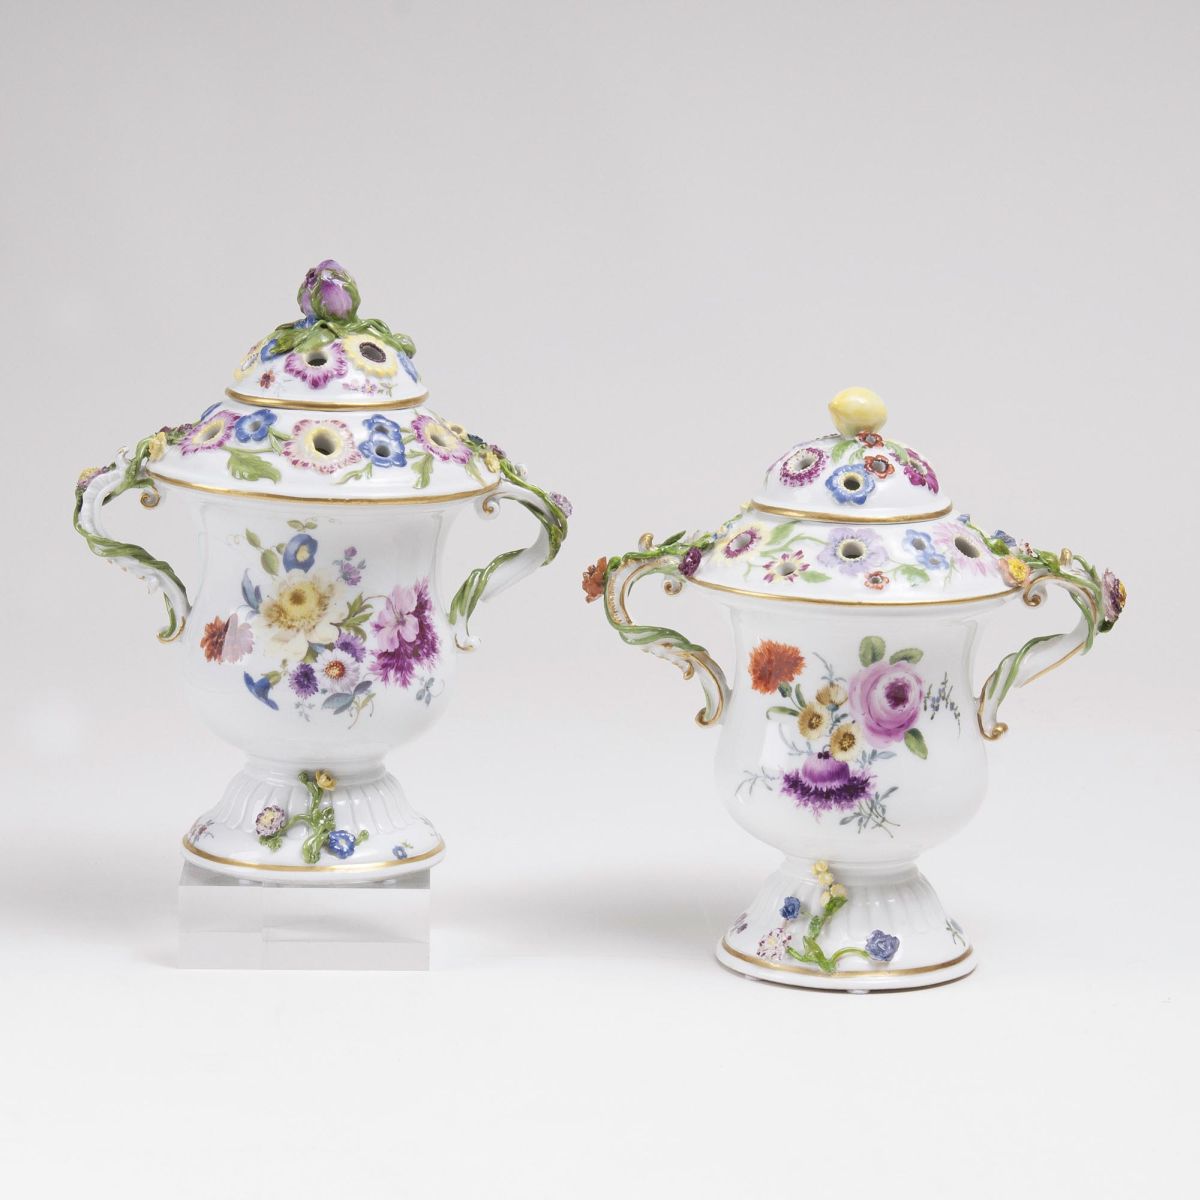 A Pair of Potpourri Vases with Flowers